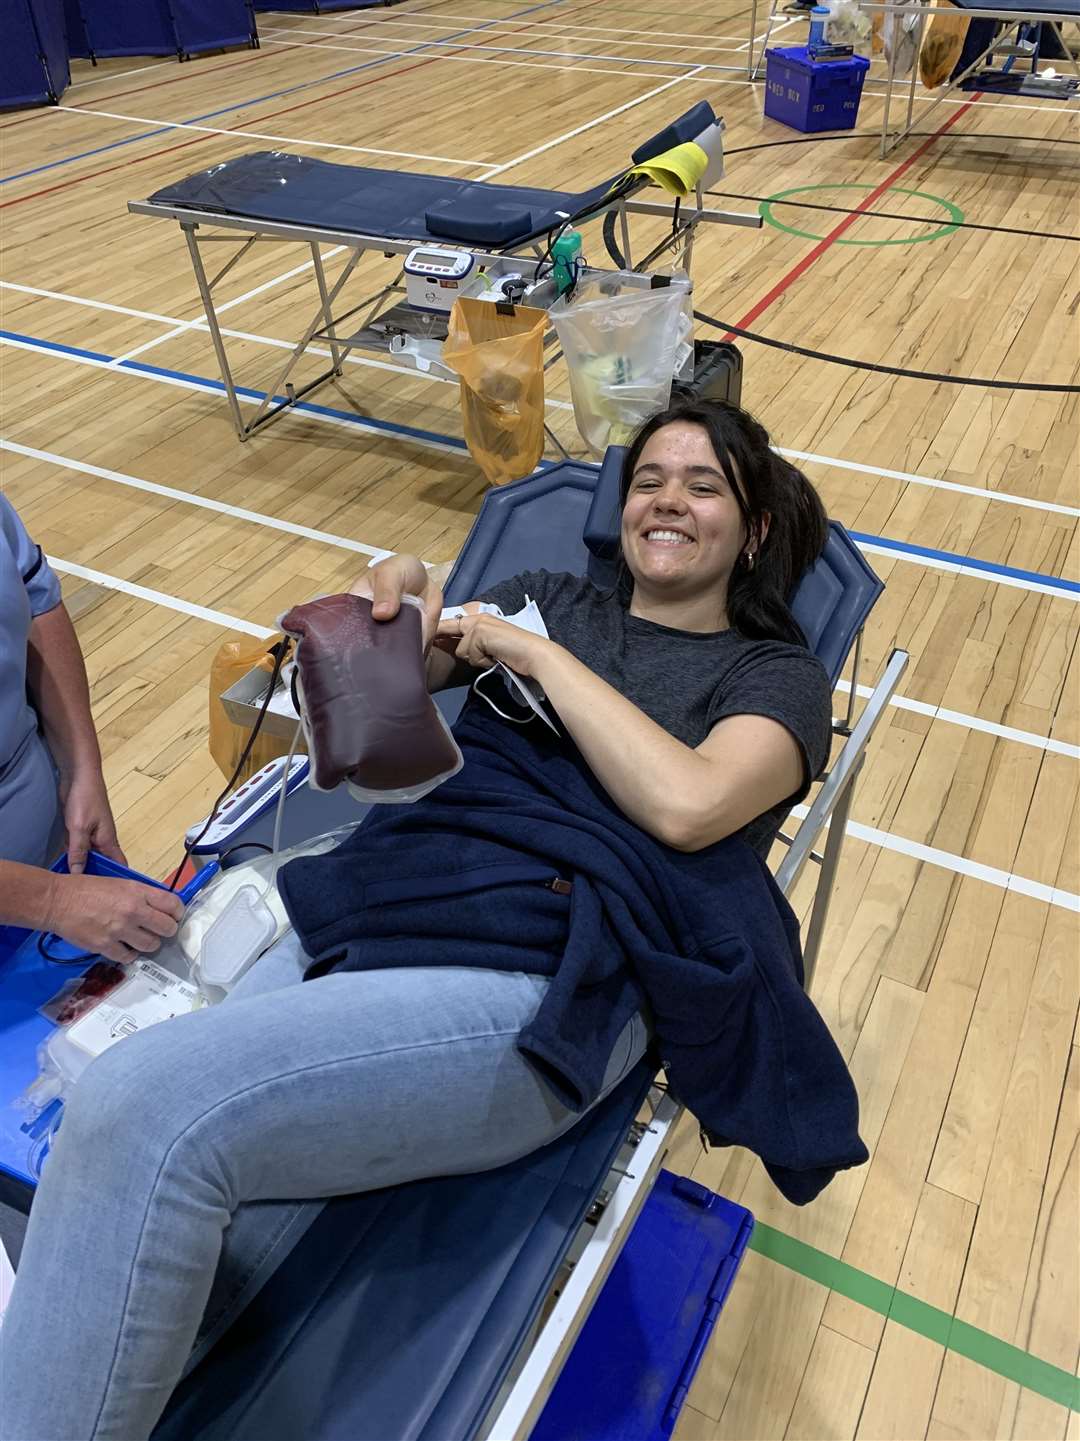 Lower Speyside Young Farmers Club member Rhionna McCallum (19), a nutrition and fitness student at Abertay University, gives blood at Forres.